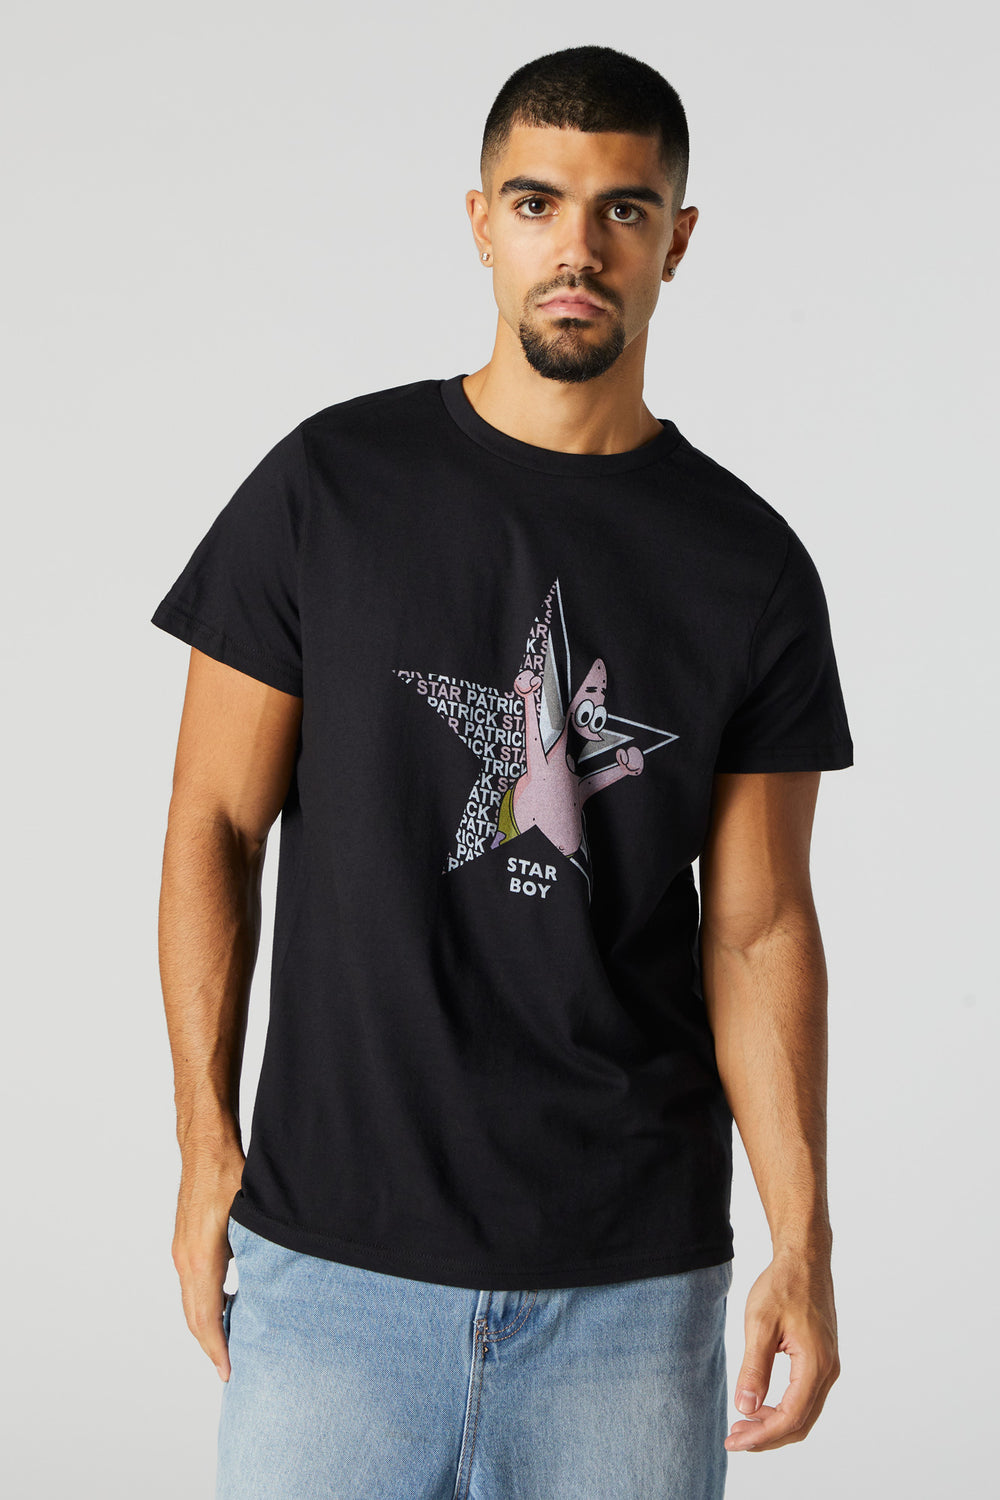 Patrick Starboy Graphic T-Shirt Patrick Starboy Graphic T-Shirt 1